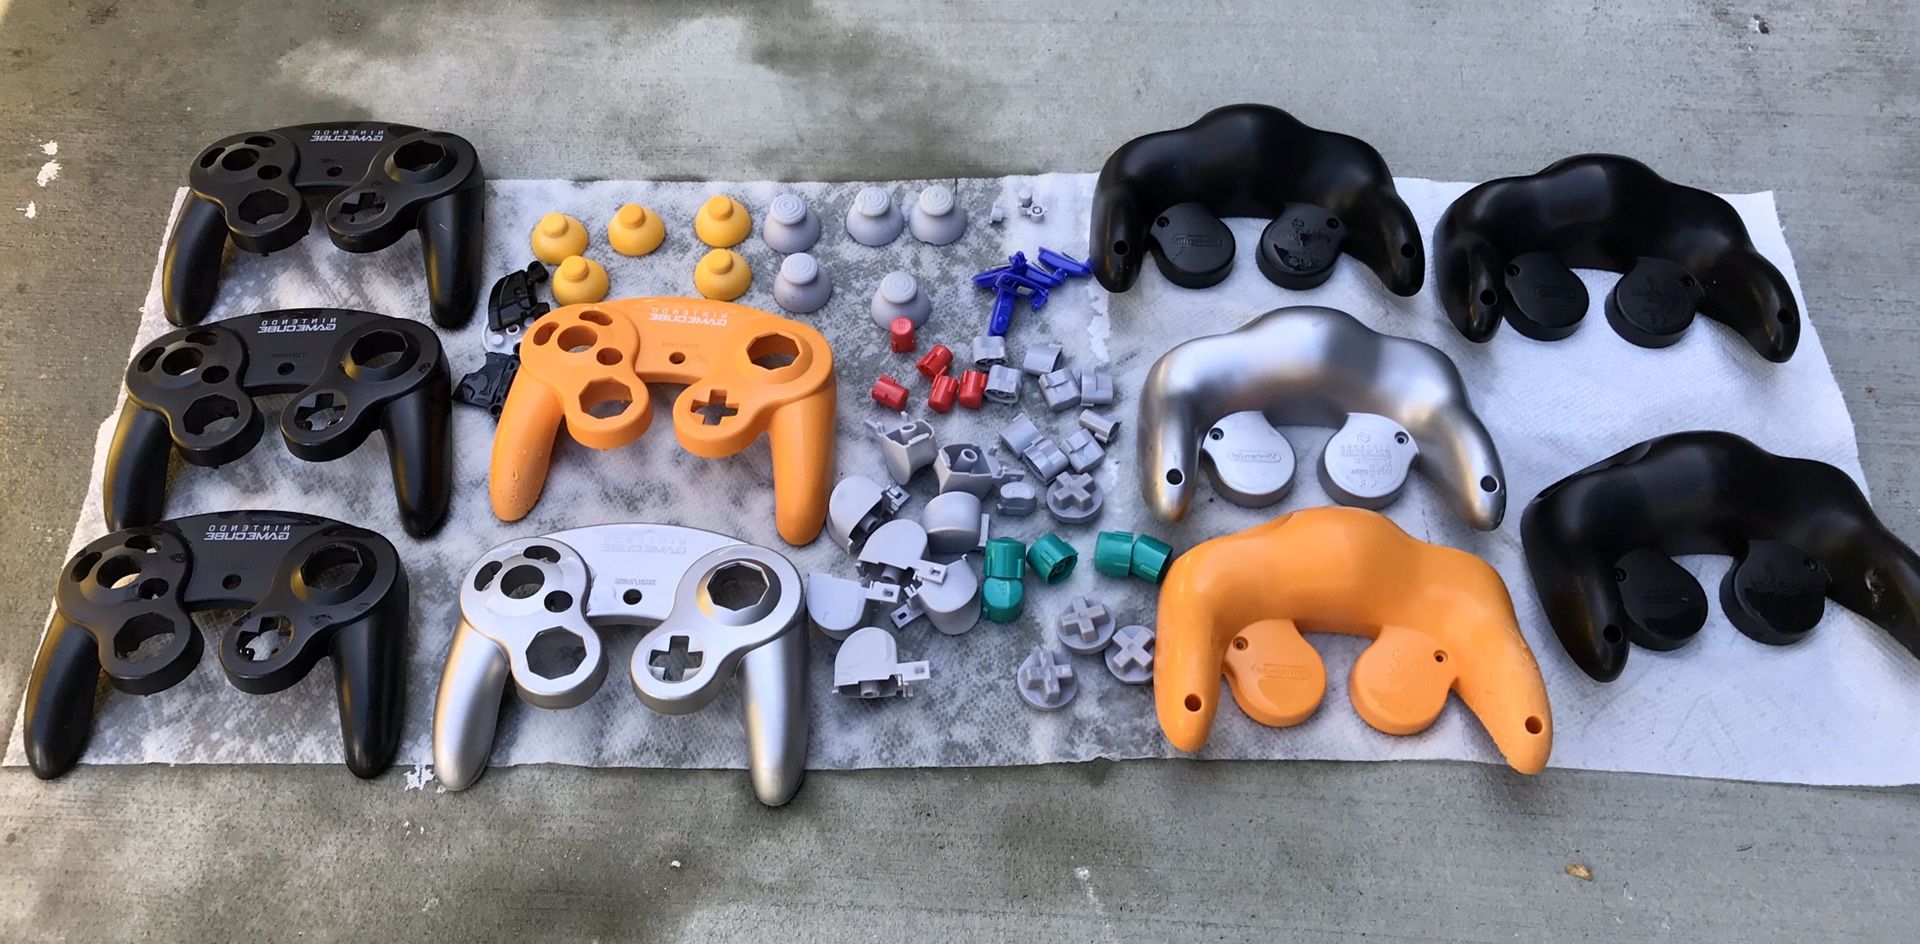 Nintendo Gamecube Controllers, Consoles (SNES, NES, N64, and More!), Playstation Consoles (Ps1, Ps2, Ps3, Ps4), and More! Cleaning/ Repair/ Restorati